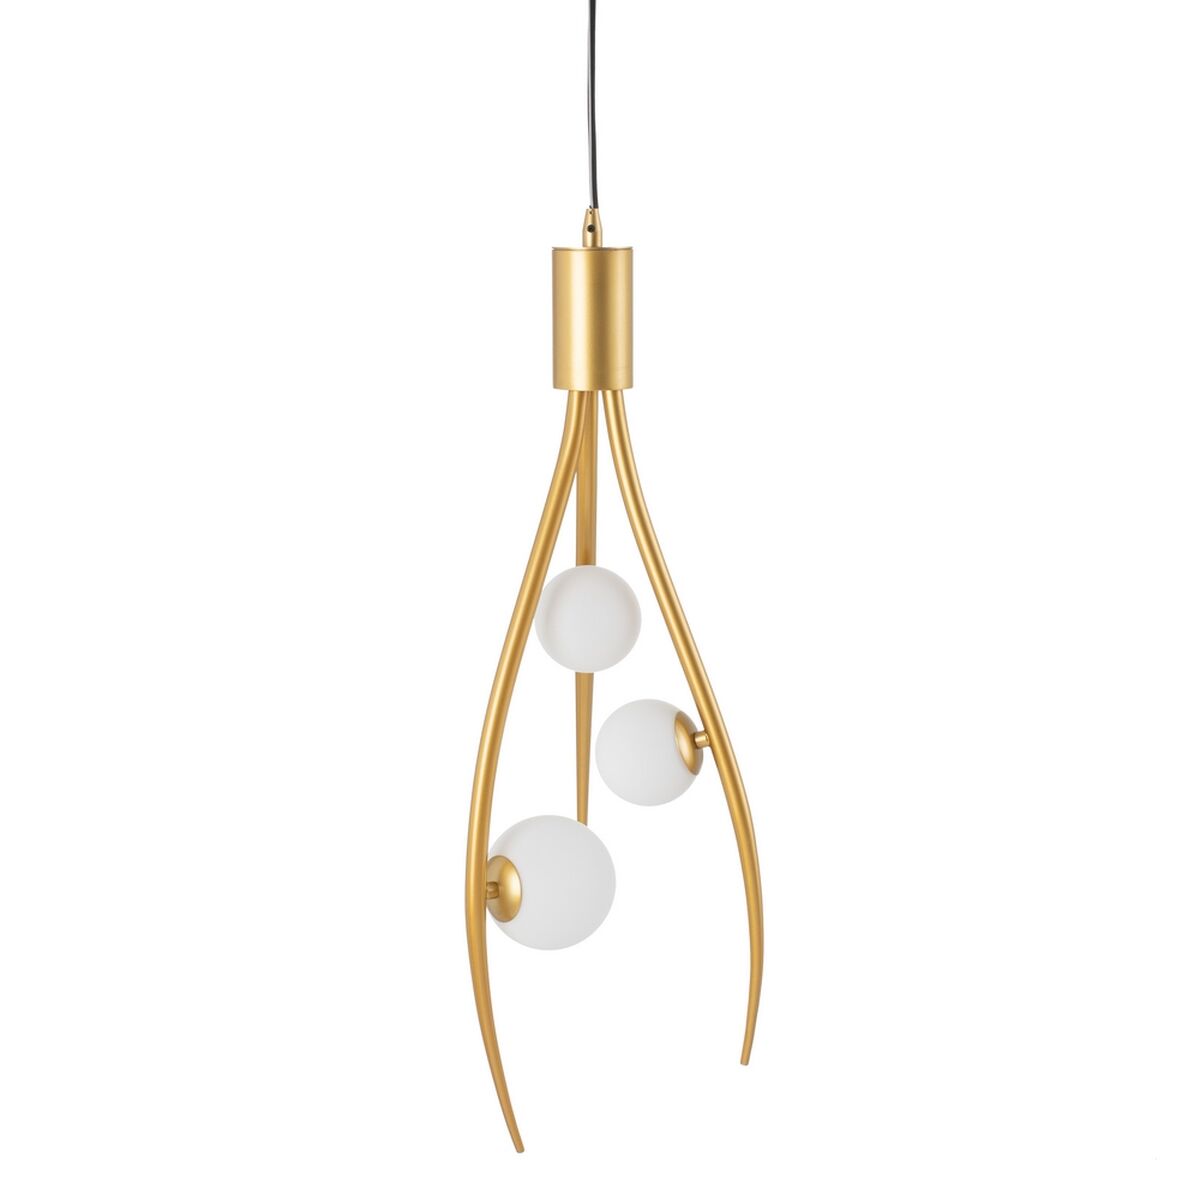 Golden Ceiling Light in Metal and White bulbs (22 x 22 x 120 cm)